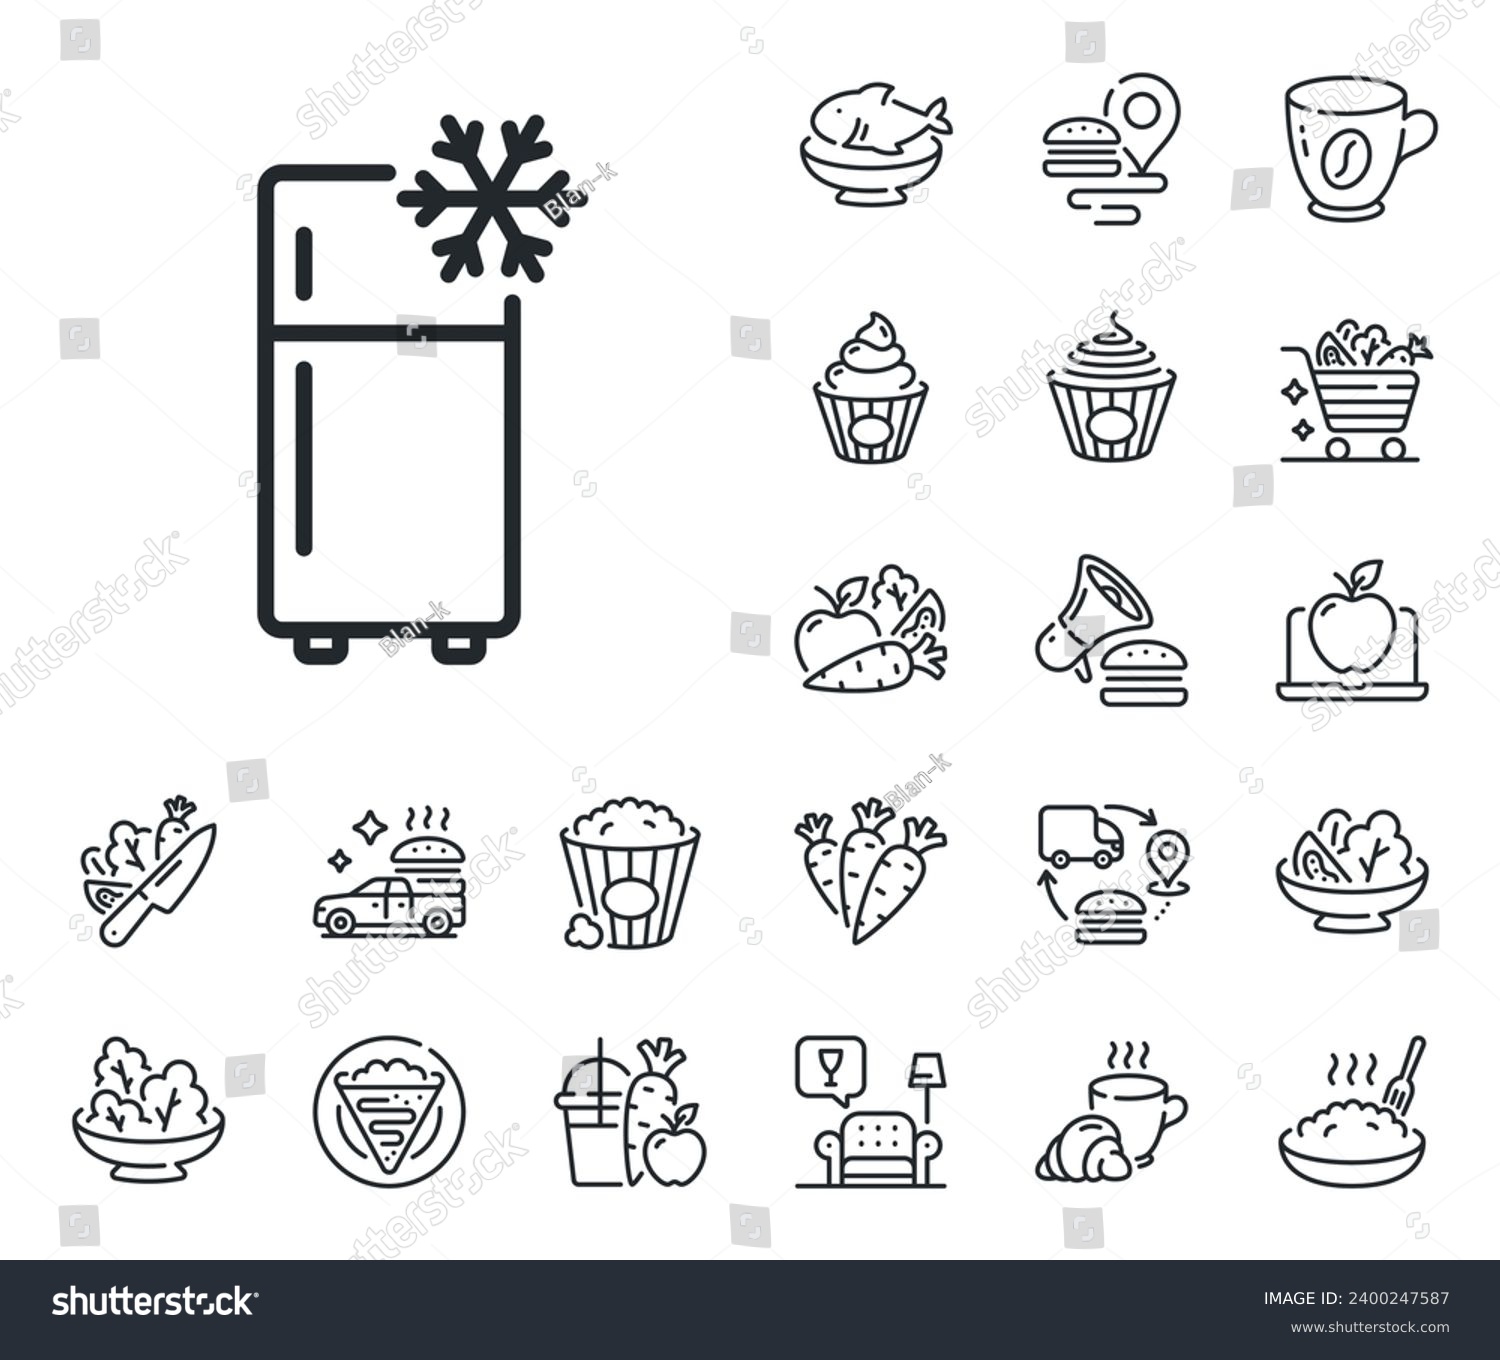 SVG of Fridge sign. Crepe, sweet popcorn and salad outline icons. Single chamber refrigerator line icon. Freezer storage symbol. Refrigerator line sign. Pasta spaghetti, fresh juice icon. Vector svg